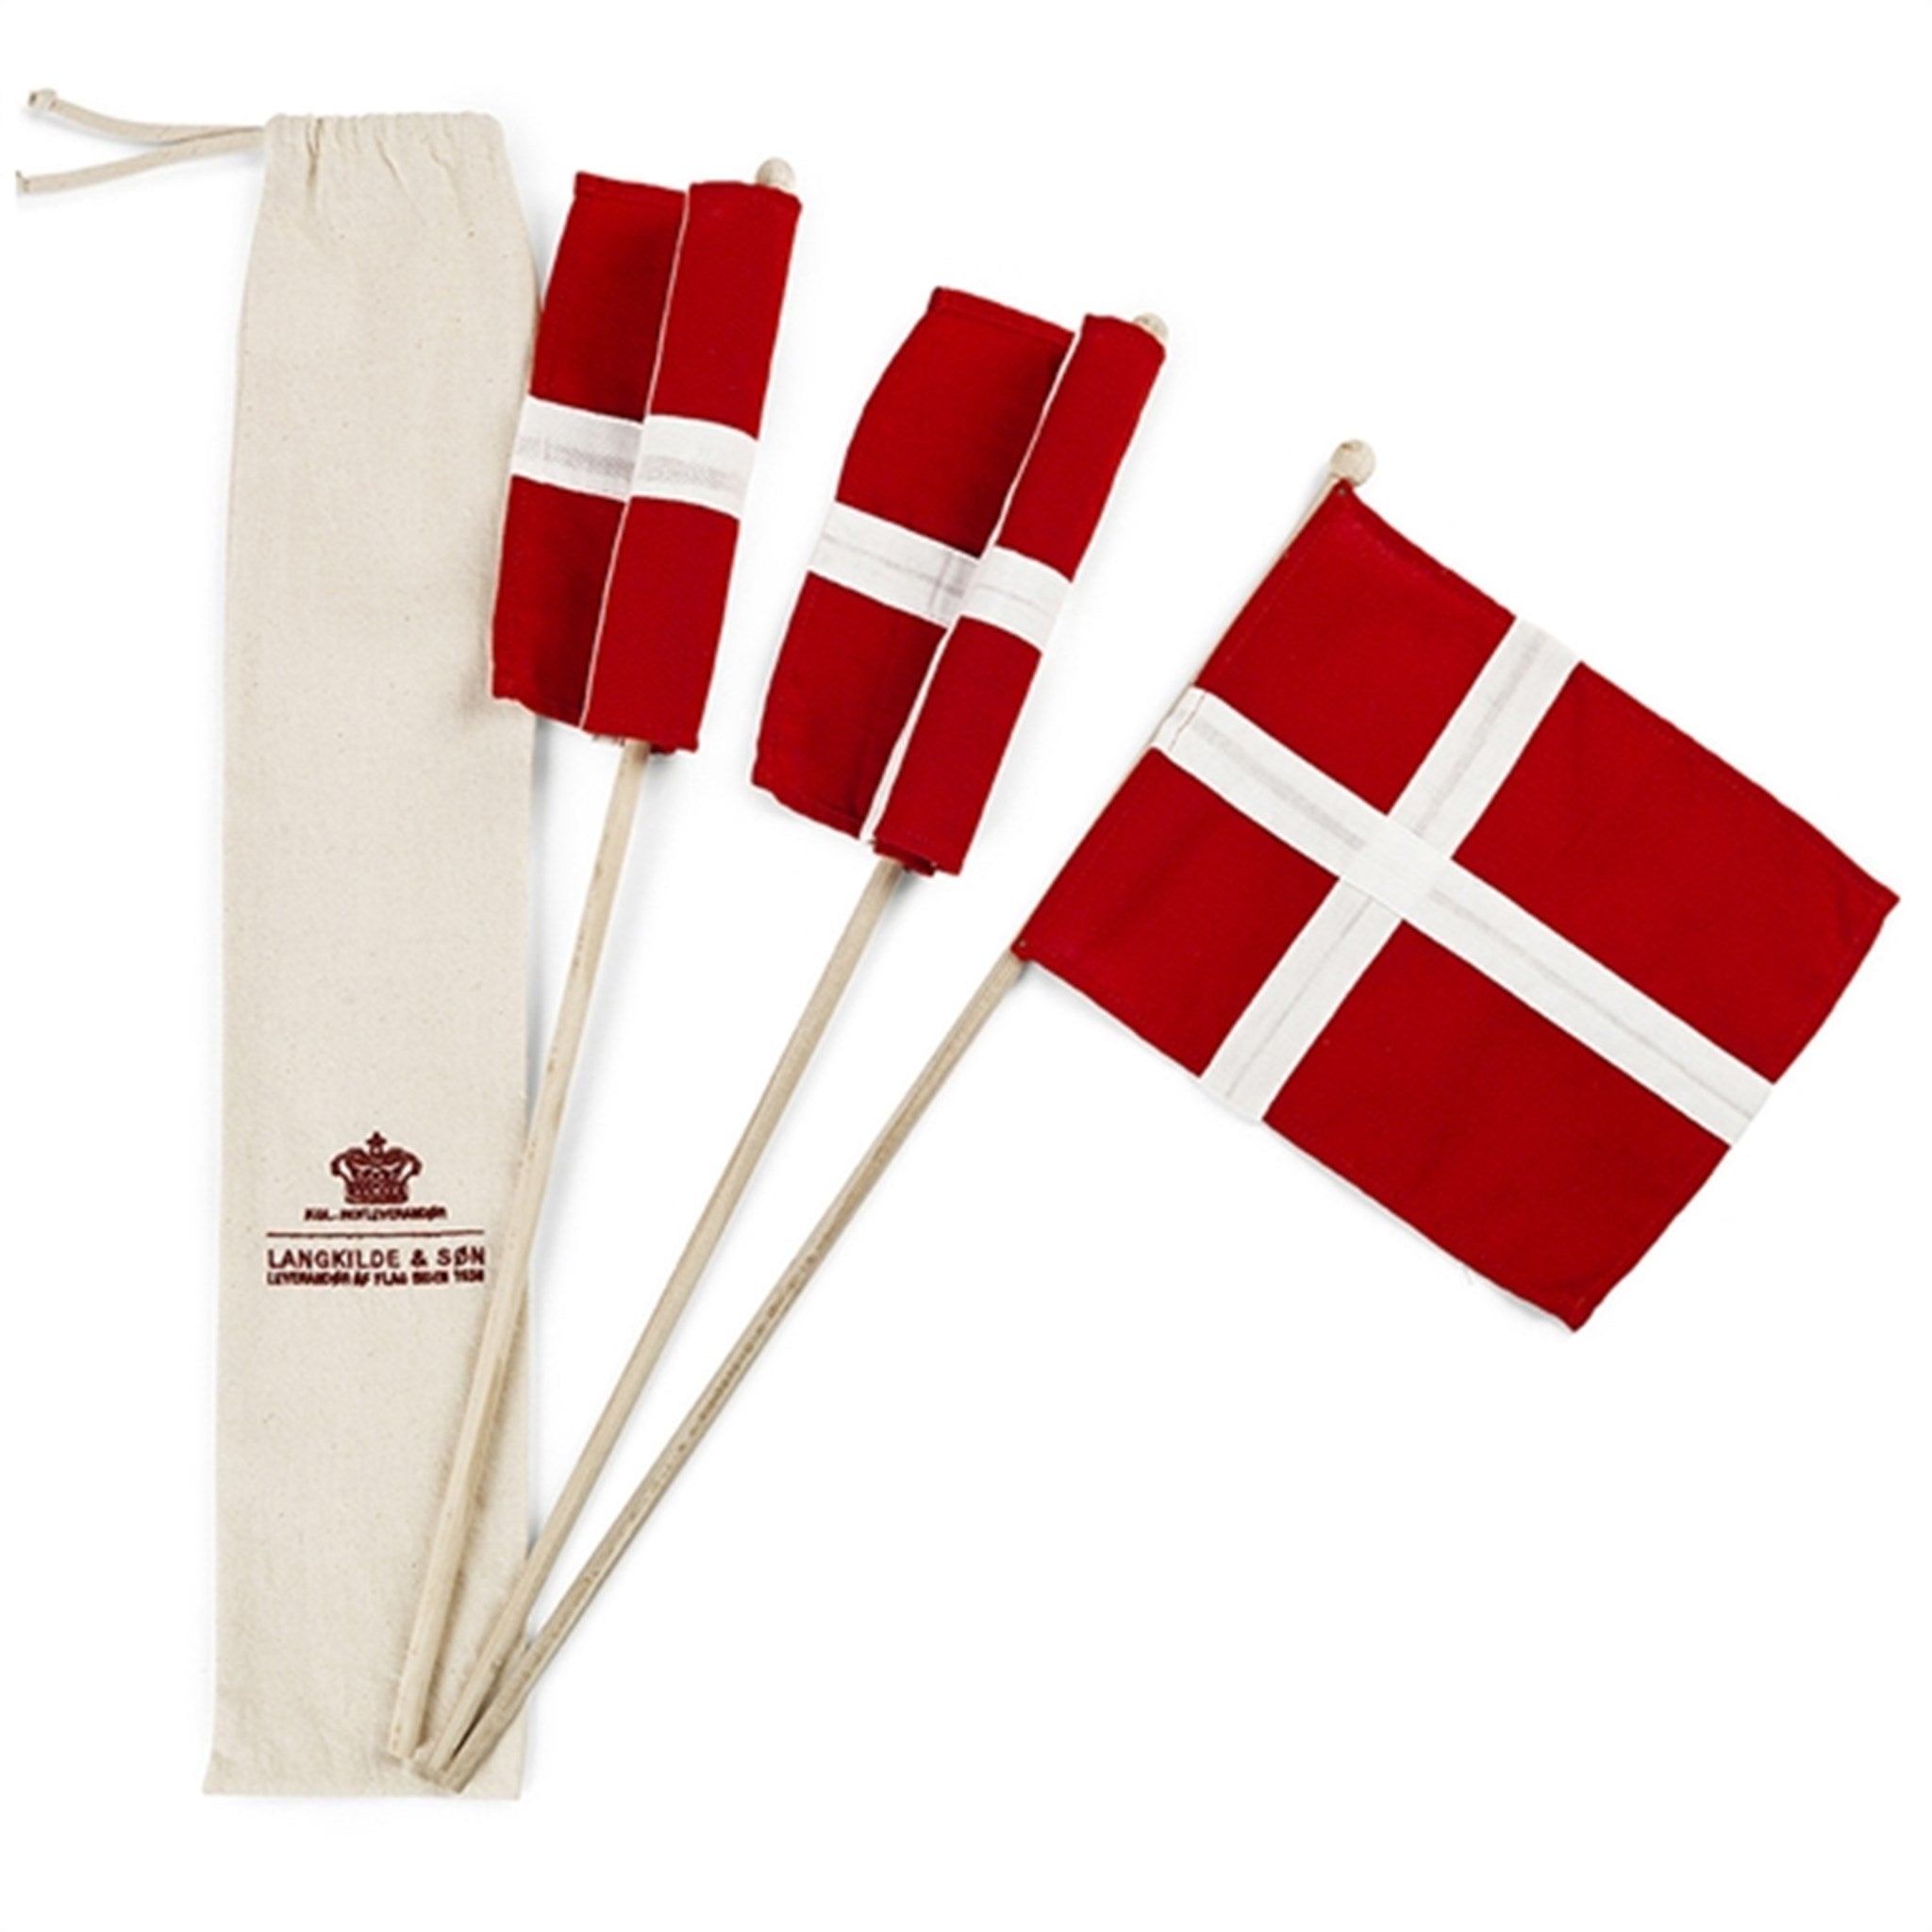 Langkilde & Søn Flags 3 pieces